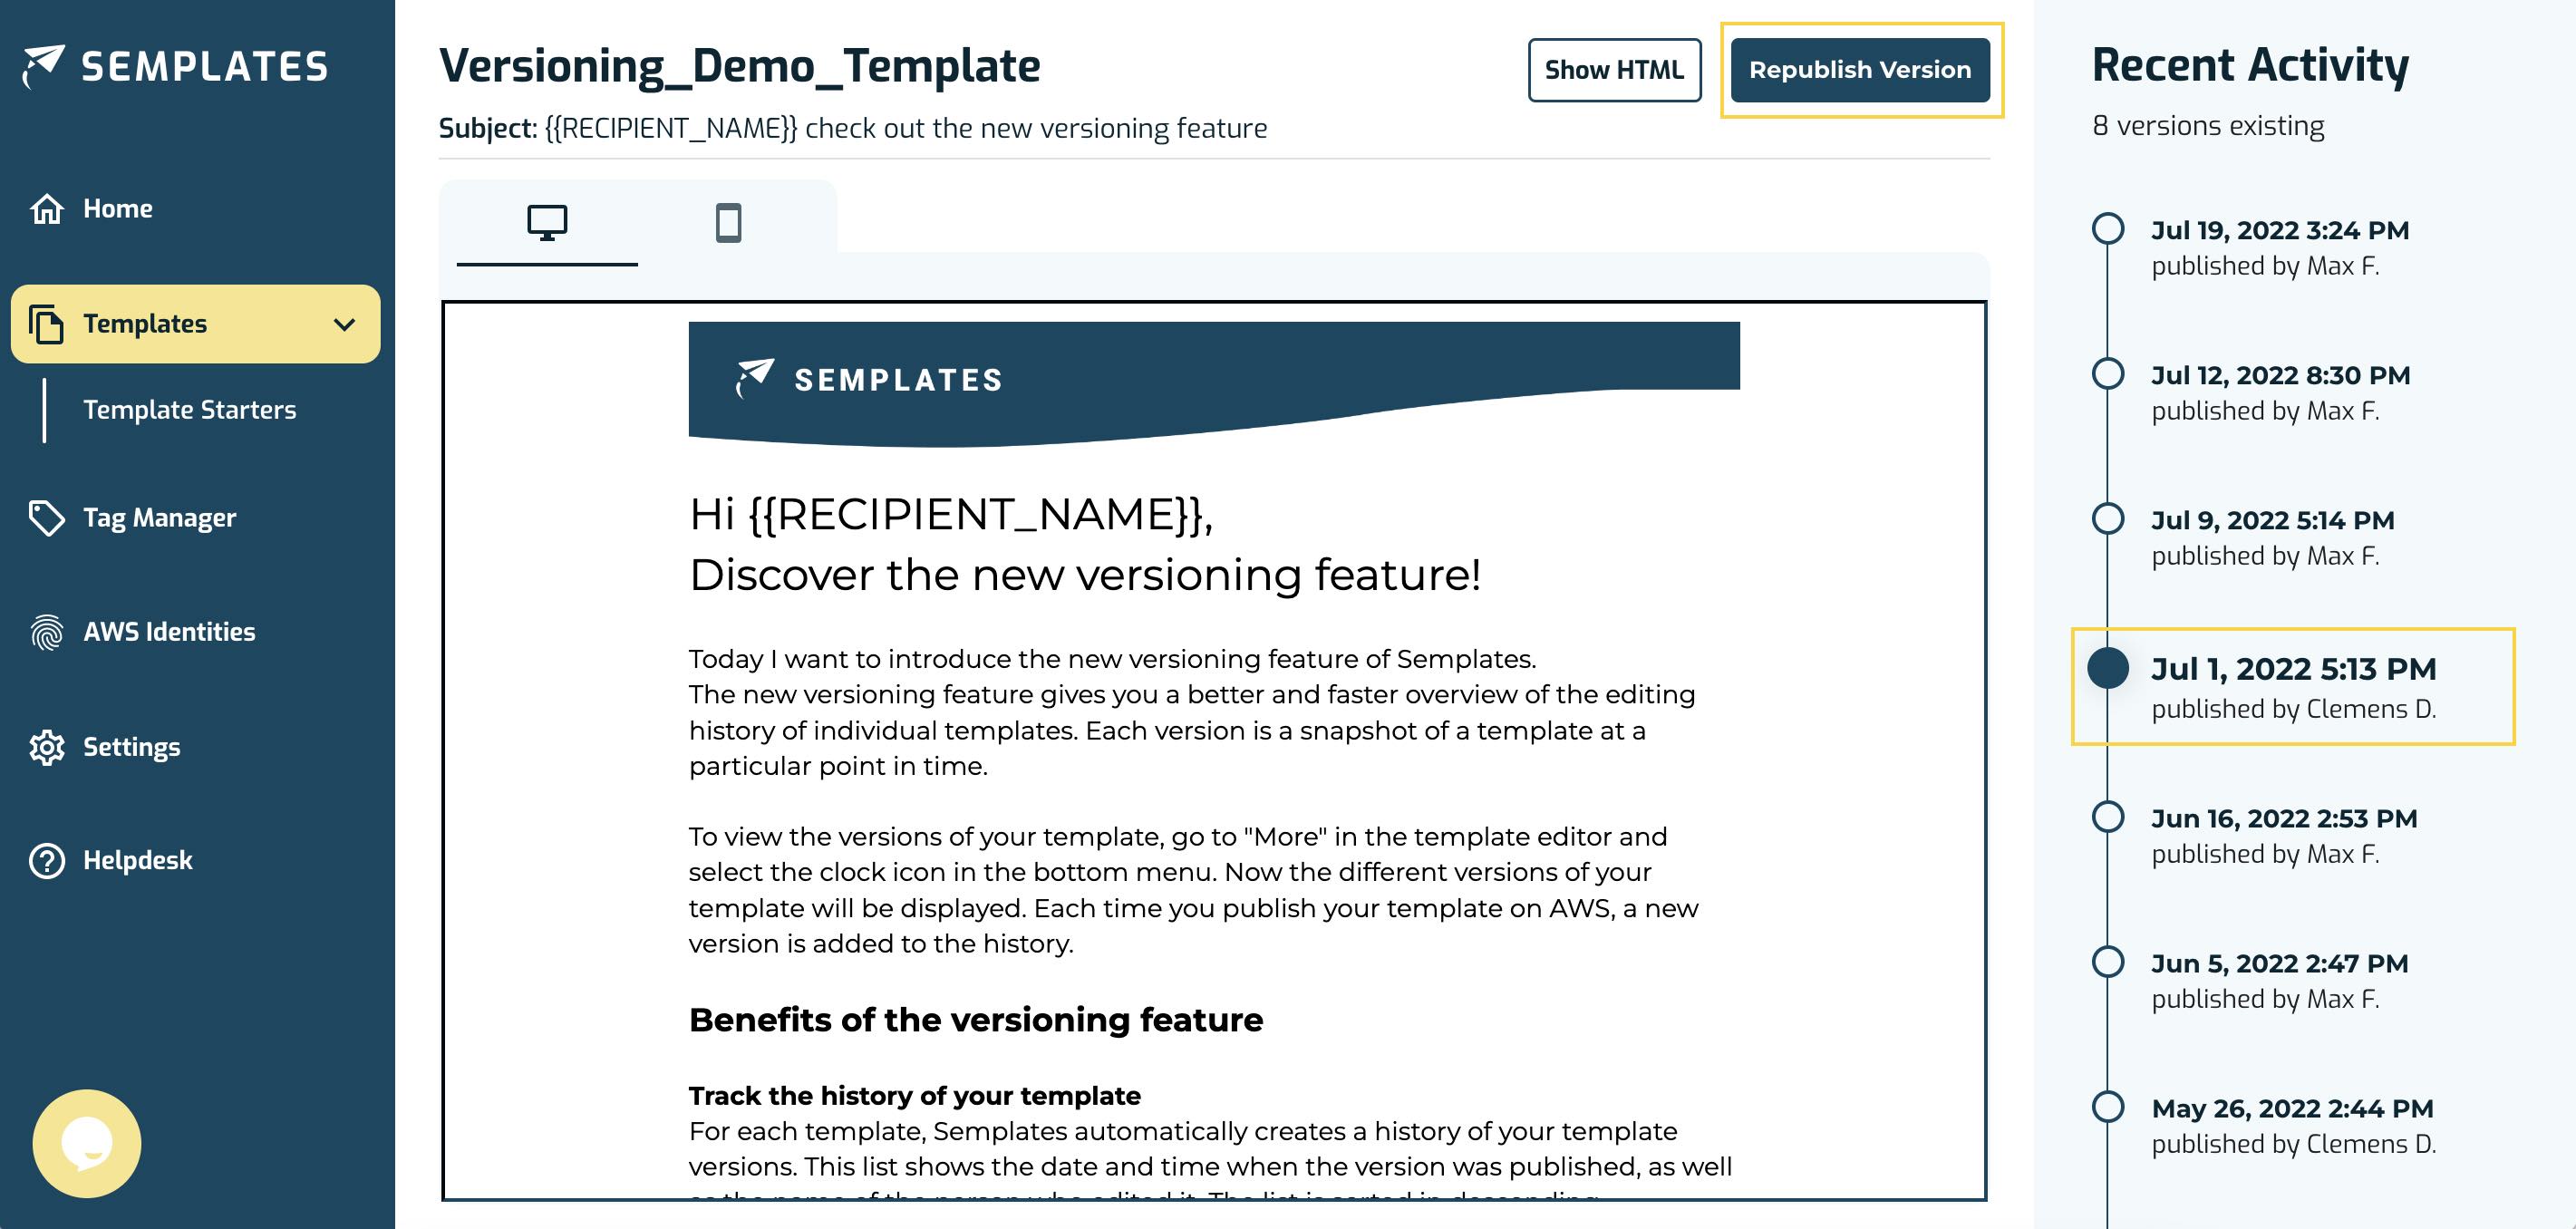 Screenshot of the versioning feature to illustrate the republishing process